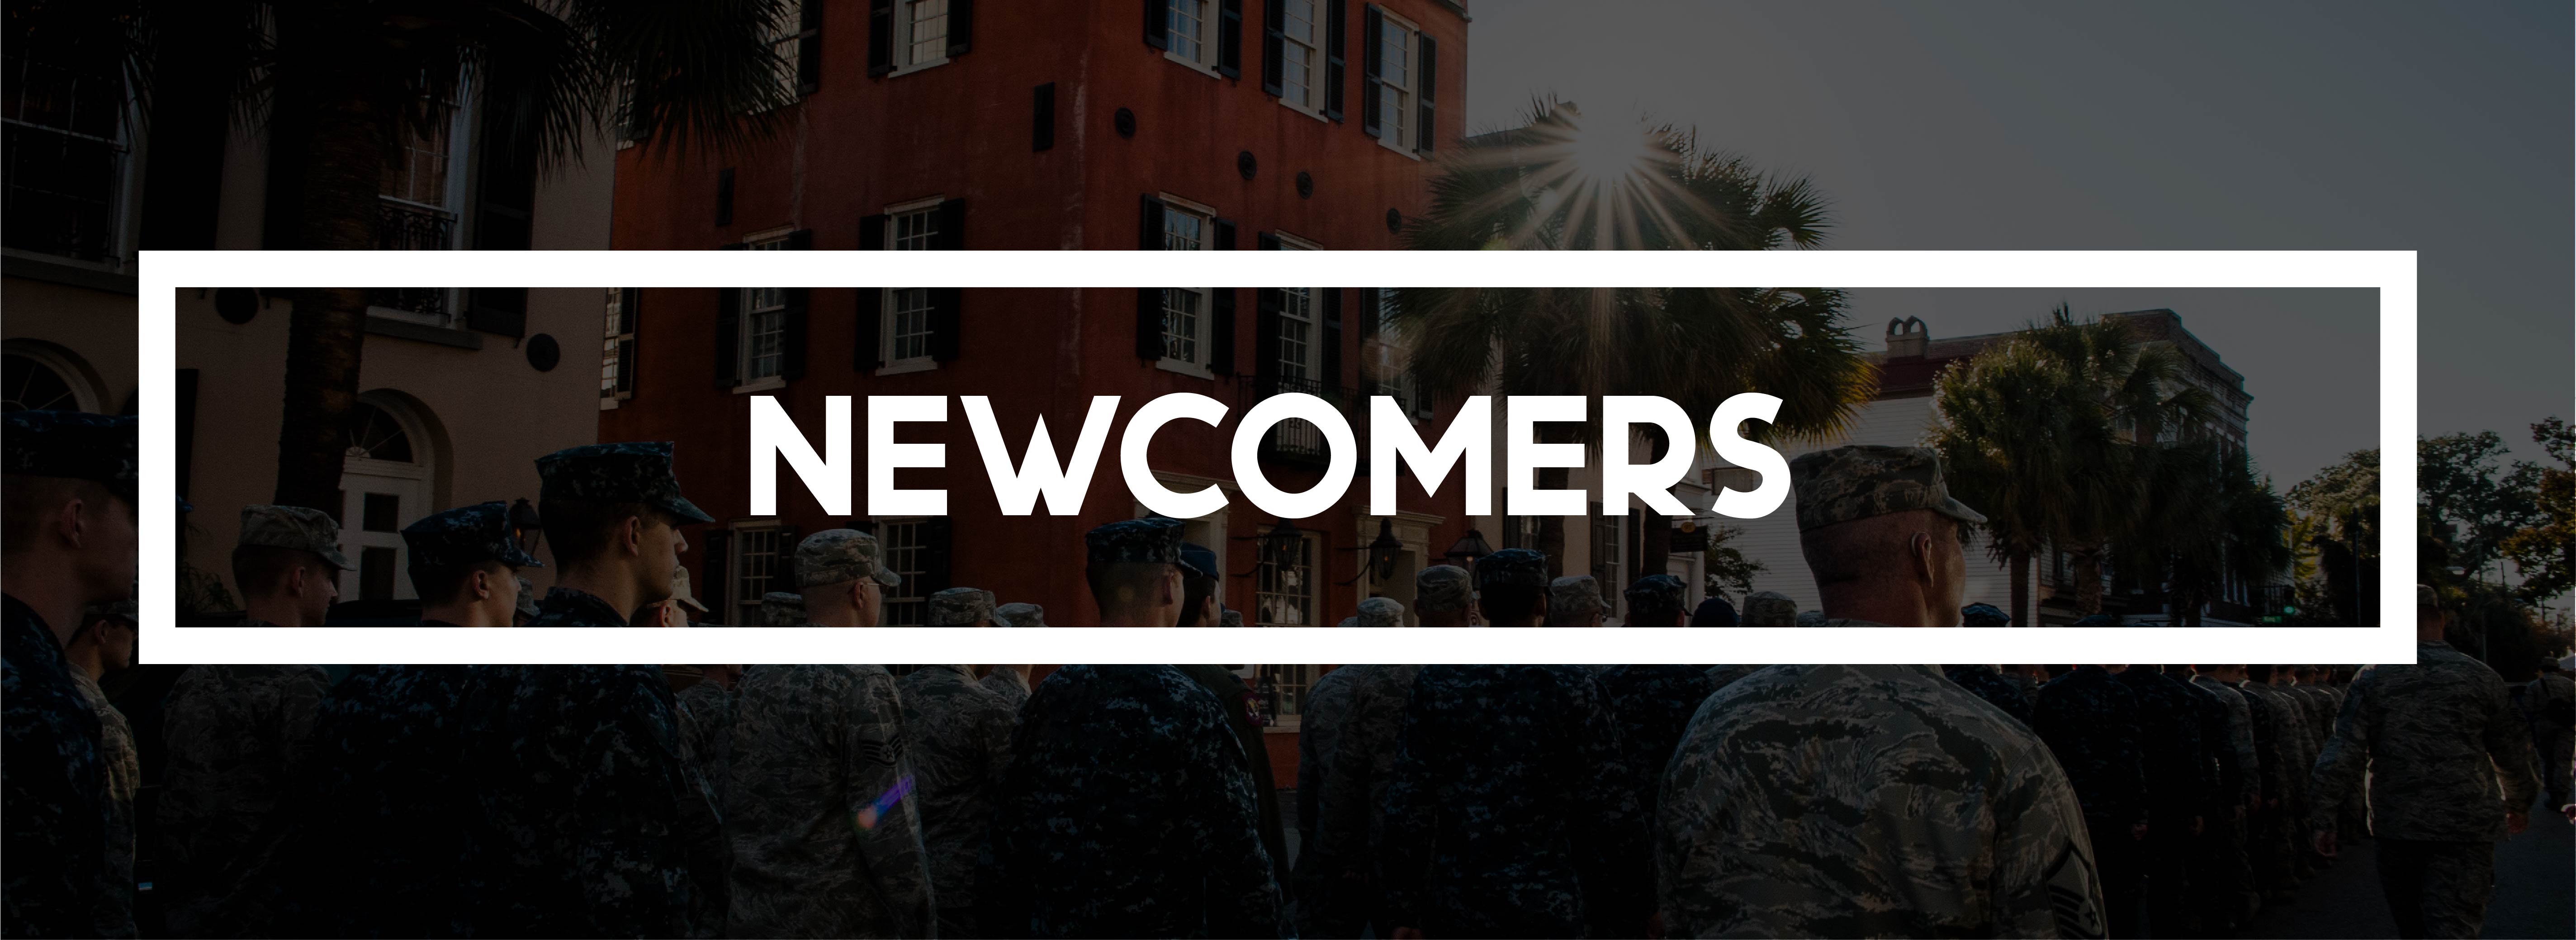 A logo for Newcomers